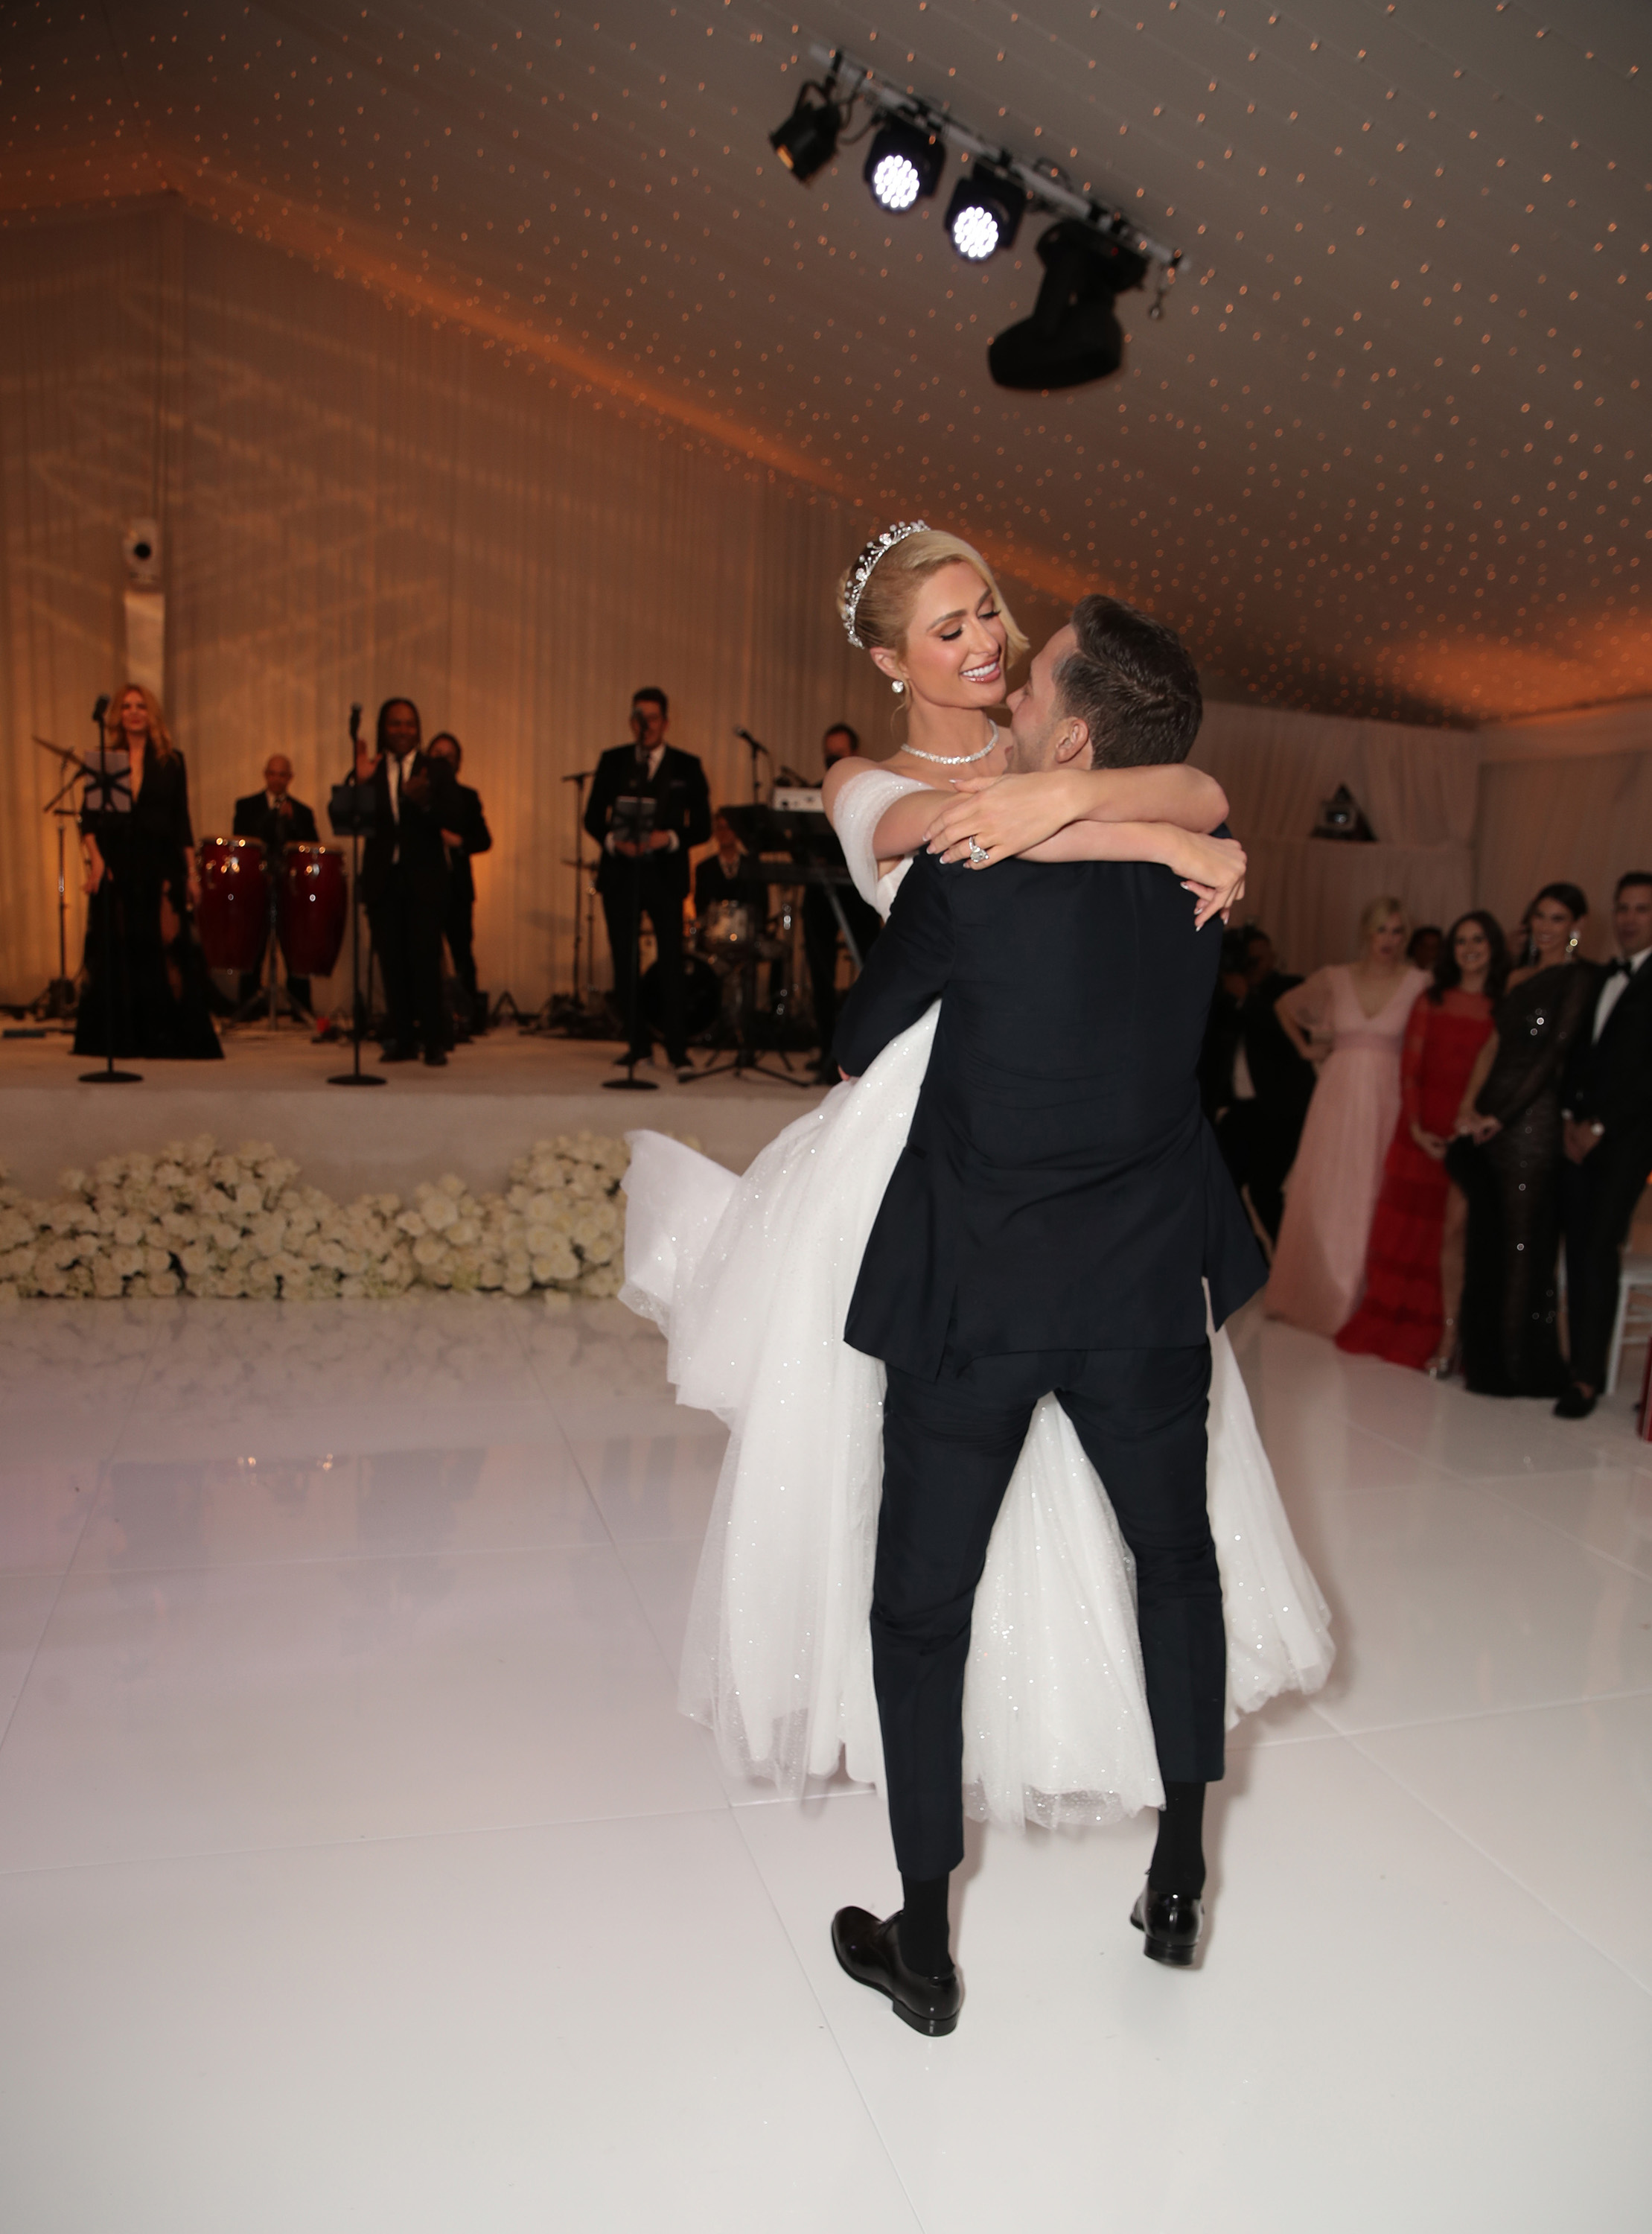 Carter Reum and Paris Hilton on their wedding day on November 11, 2021 | Source: Getty Images